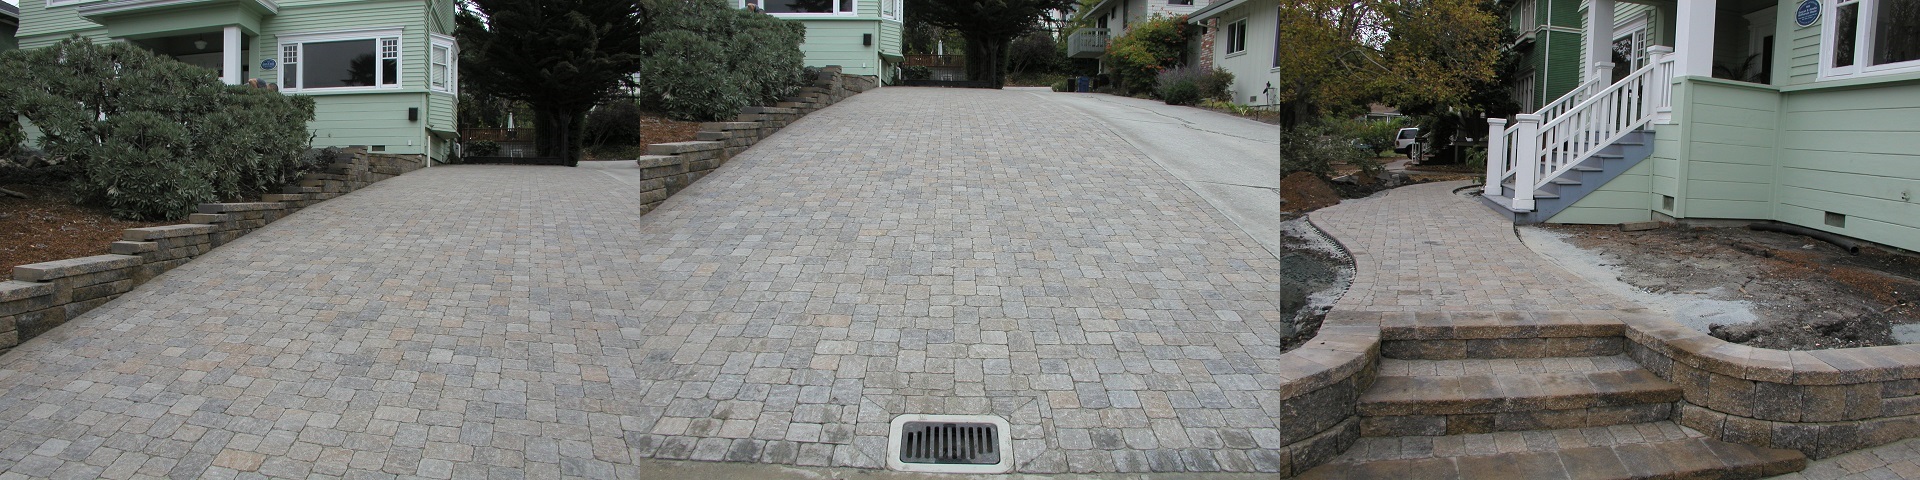 Pavers and Artificial Turf in Aptos, CA